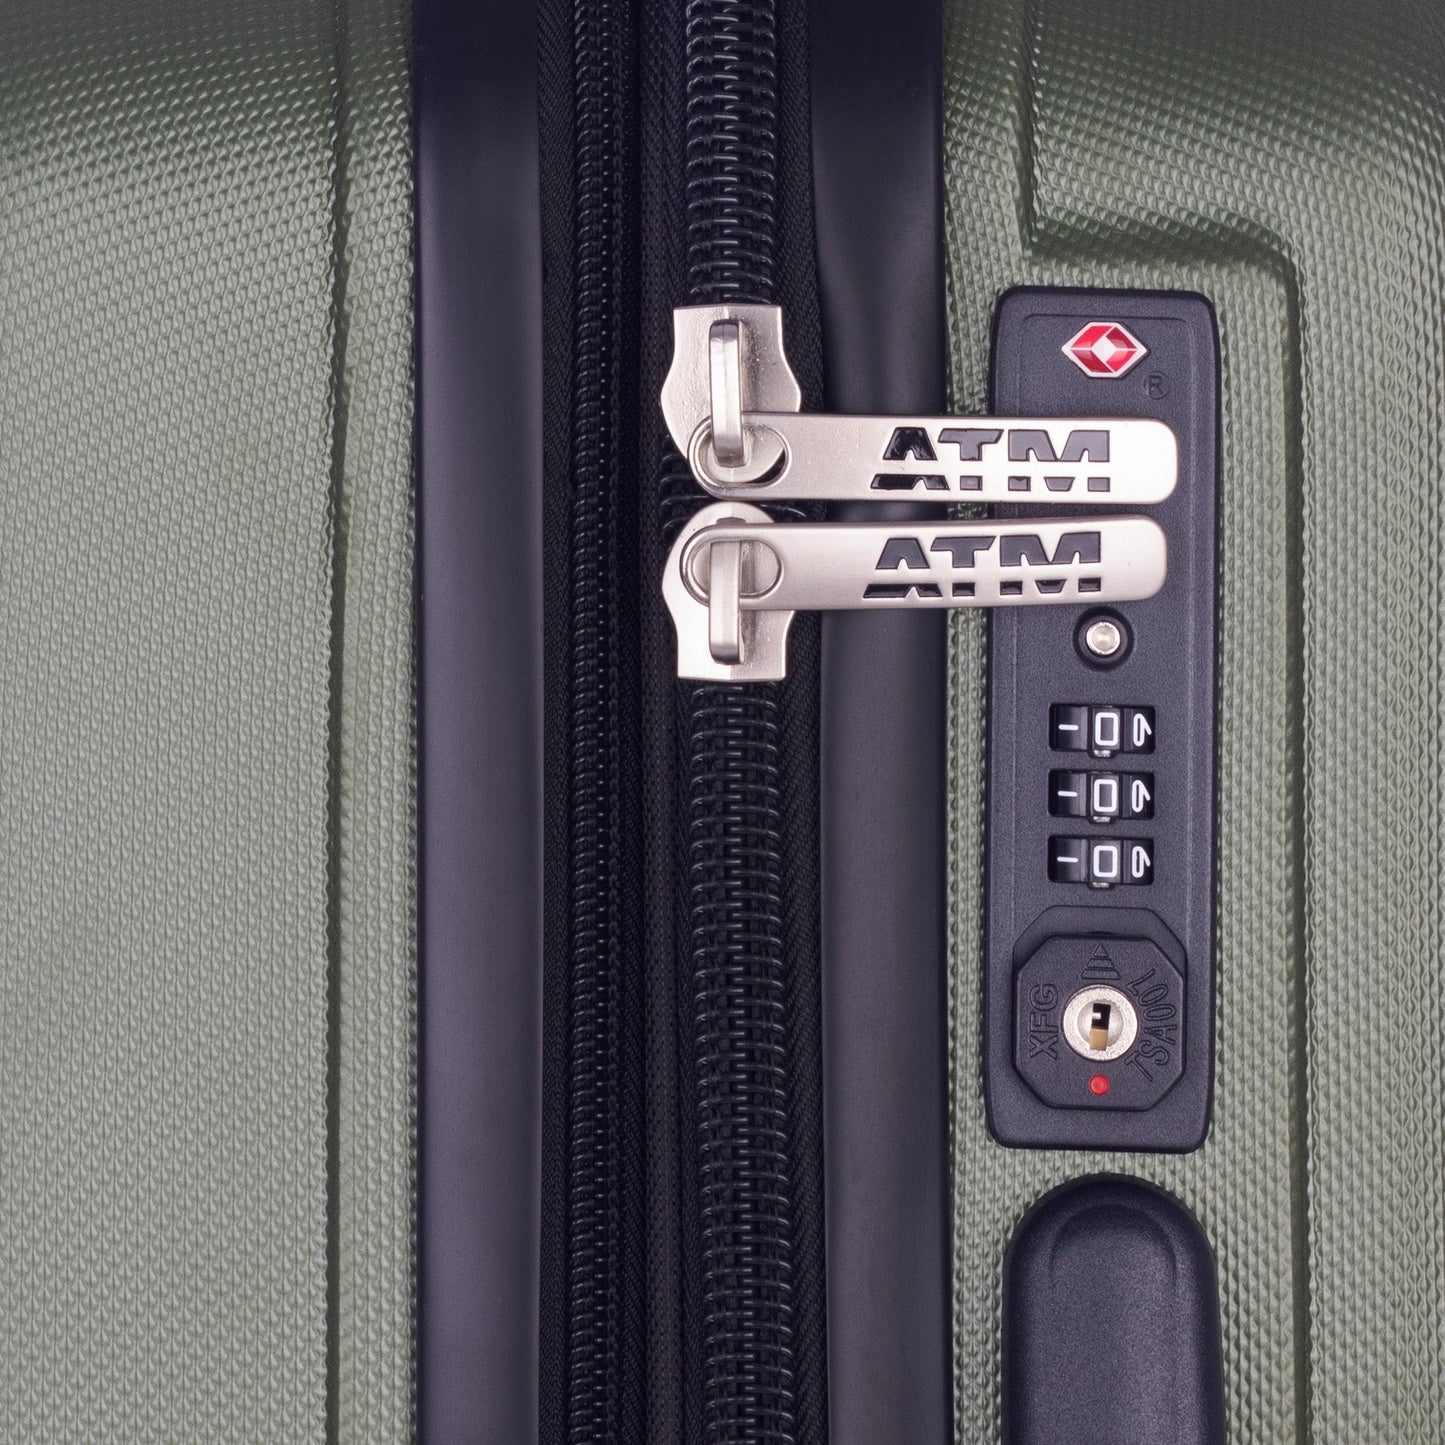 Tactic Collection Green For Airplane Cabin Hardhead Luggage (18/19/20/21")